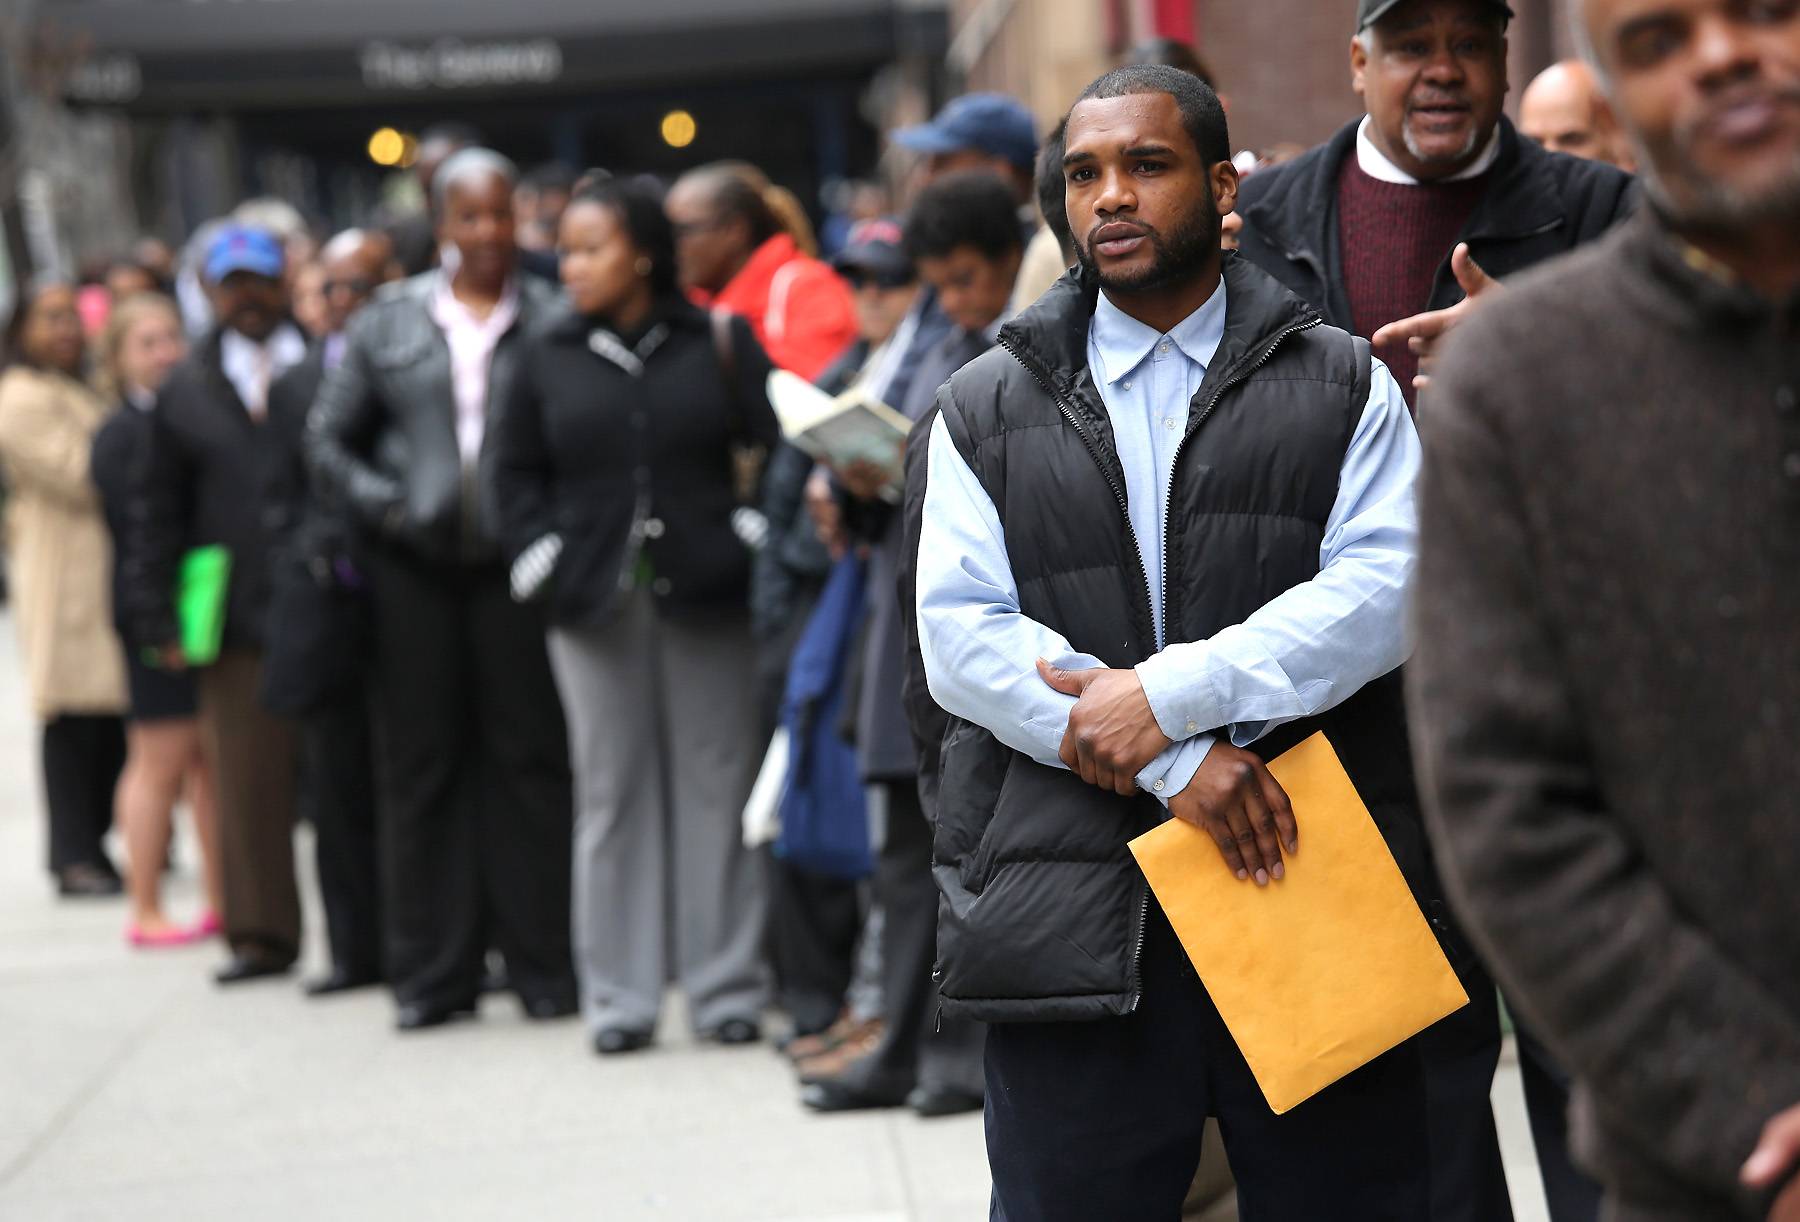 Black Unemployment Rate Jumps to 13.5 Percent in May